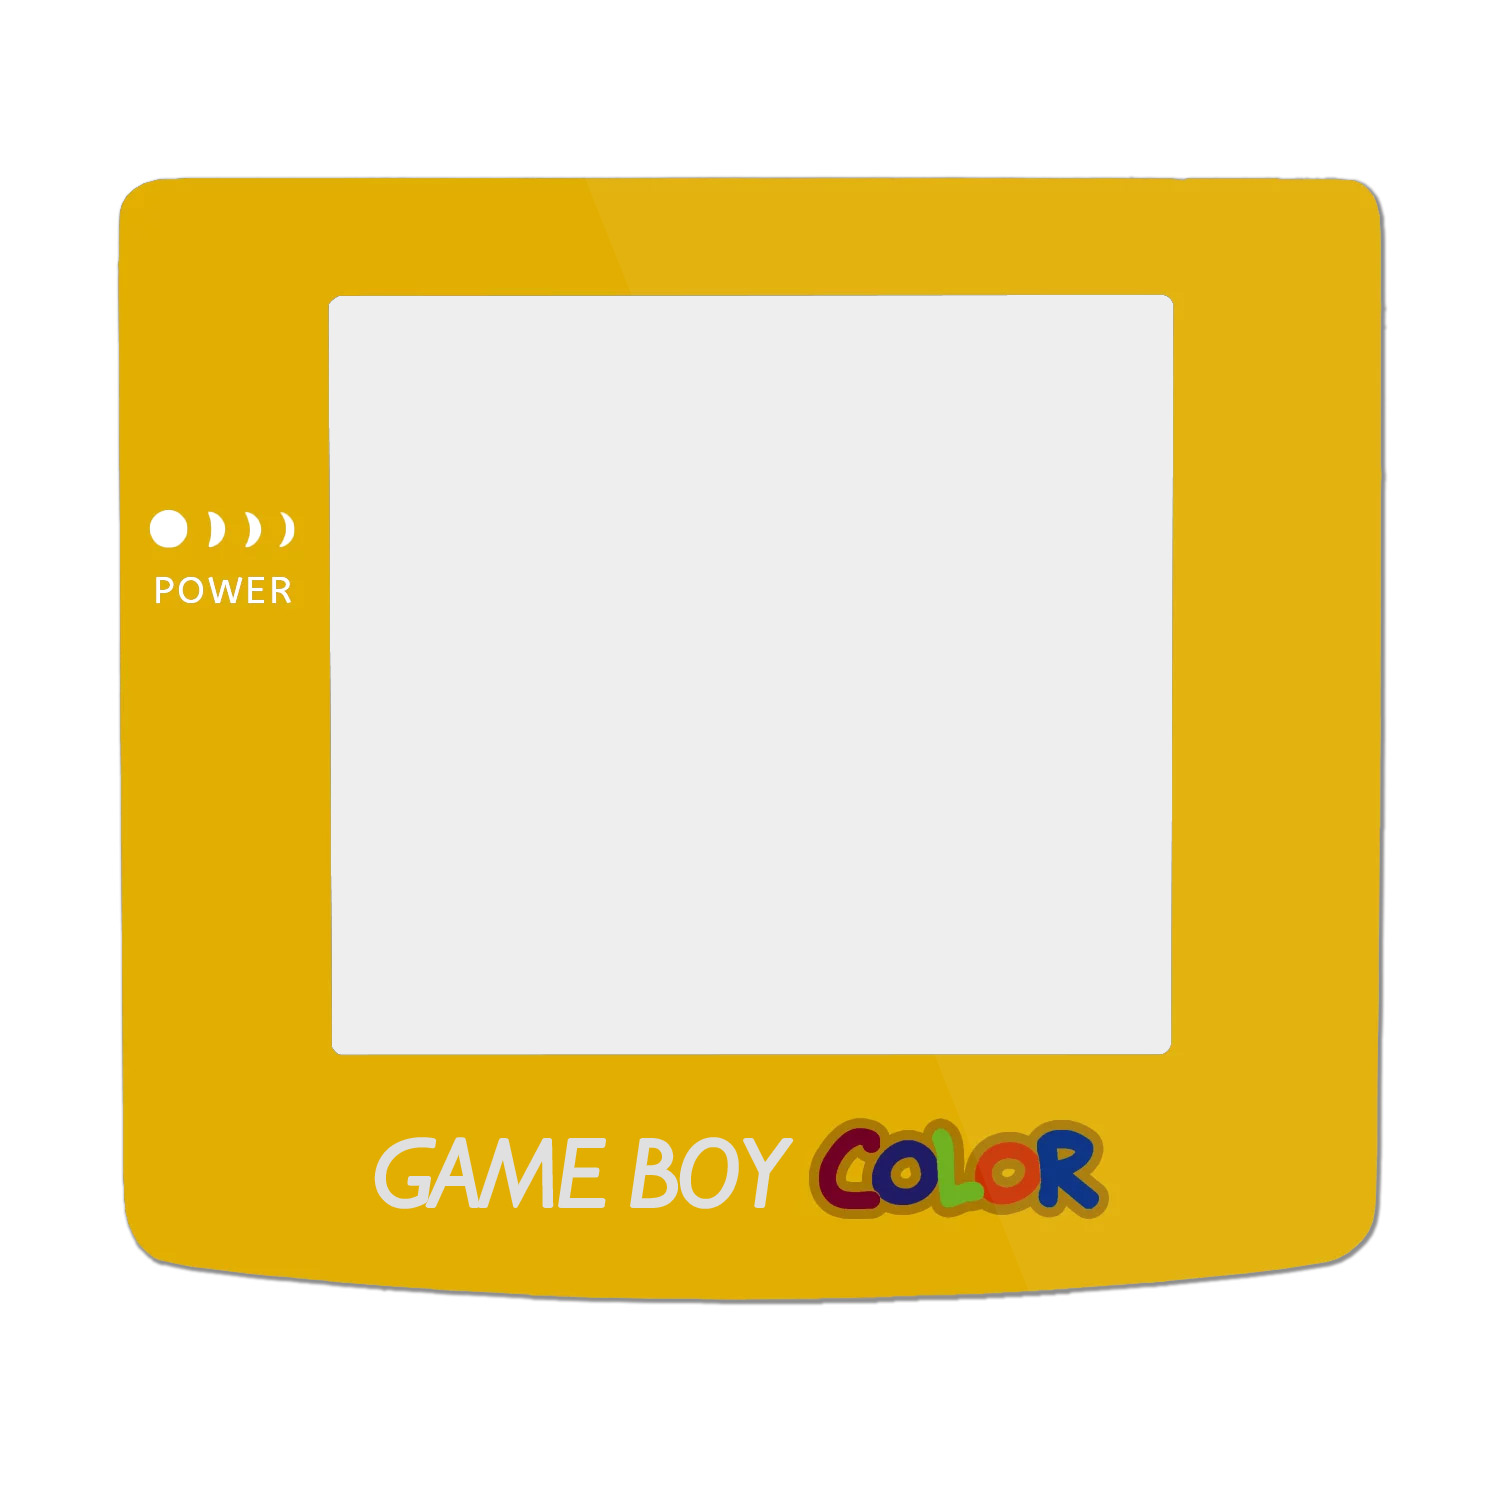 Game Boy Color Display Disc (Yellow)